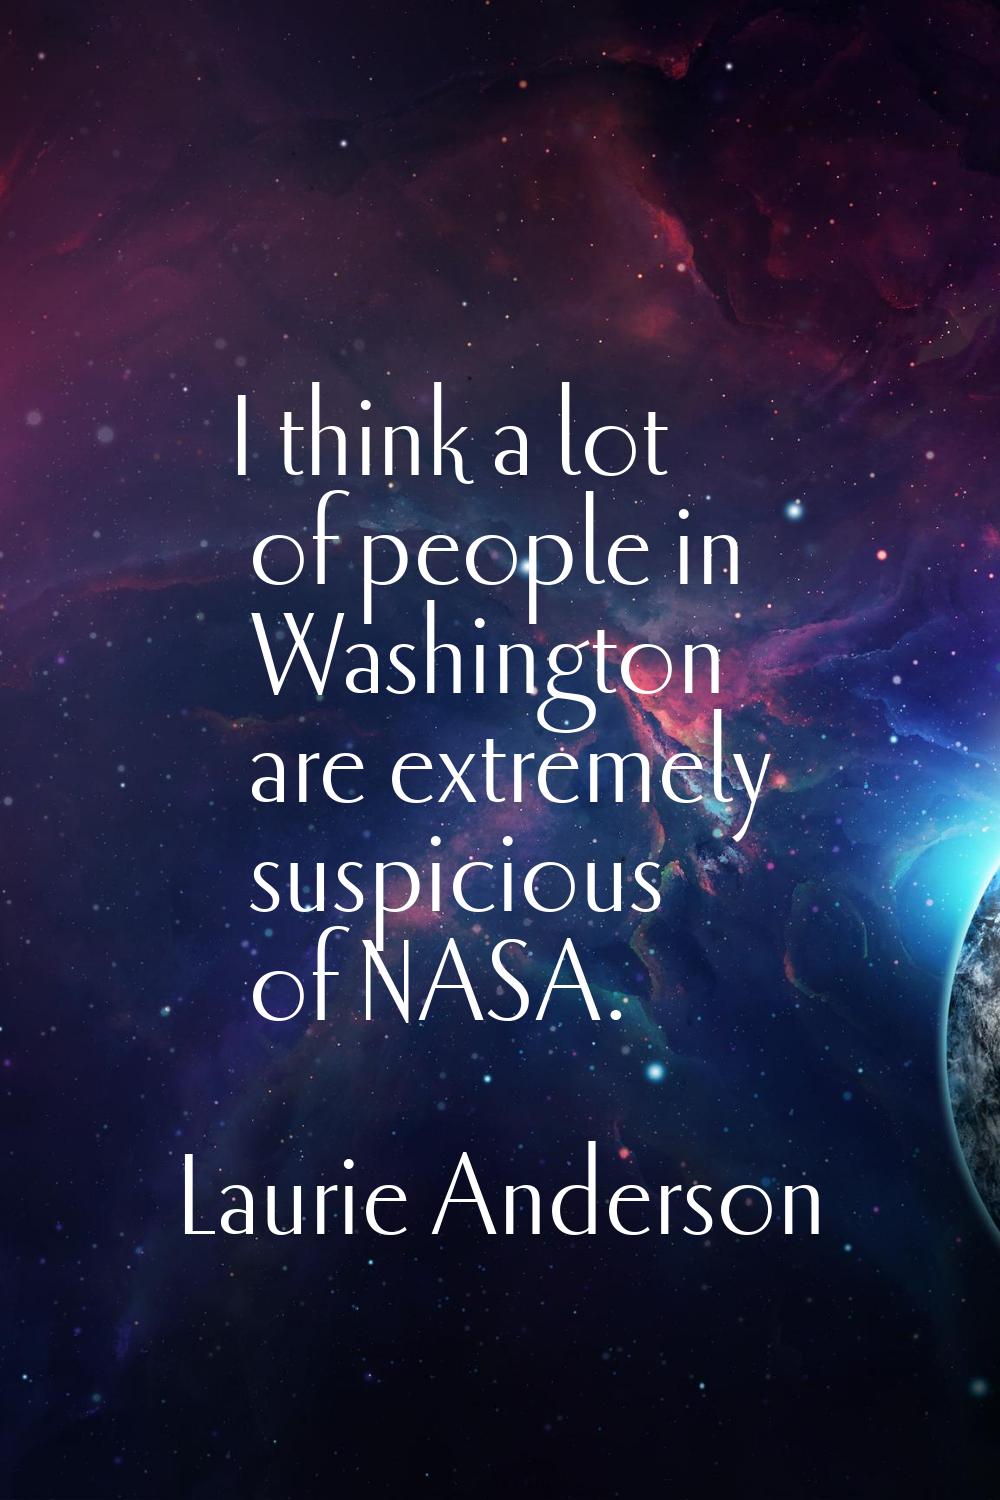 I think a lot of people in Washington are extremely suspicious of NASA.